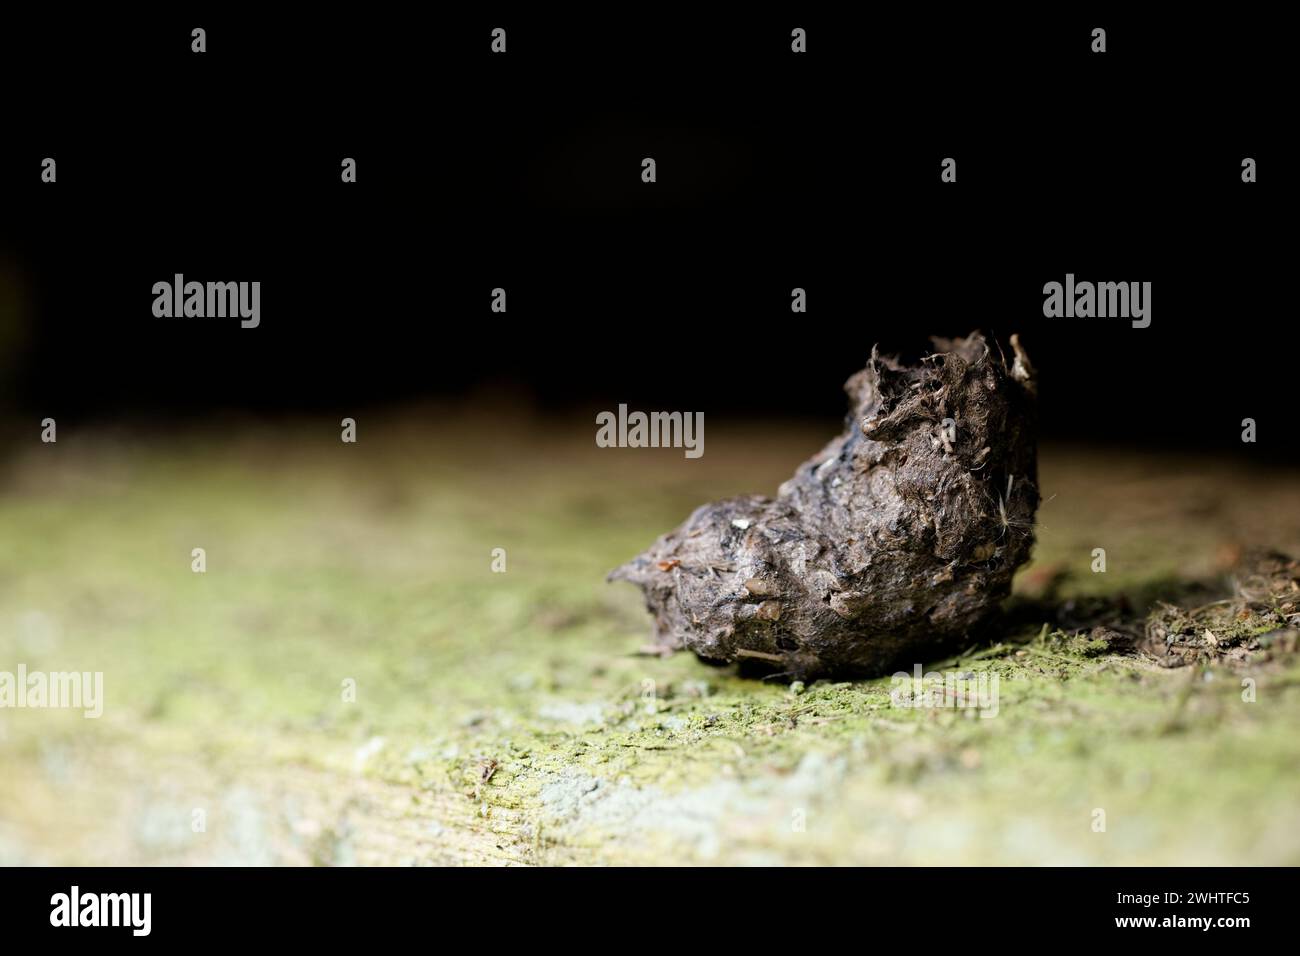 Tawny owl pellet (Strix aluco) in an old abandoned barn Stock Photo